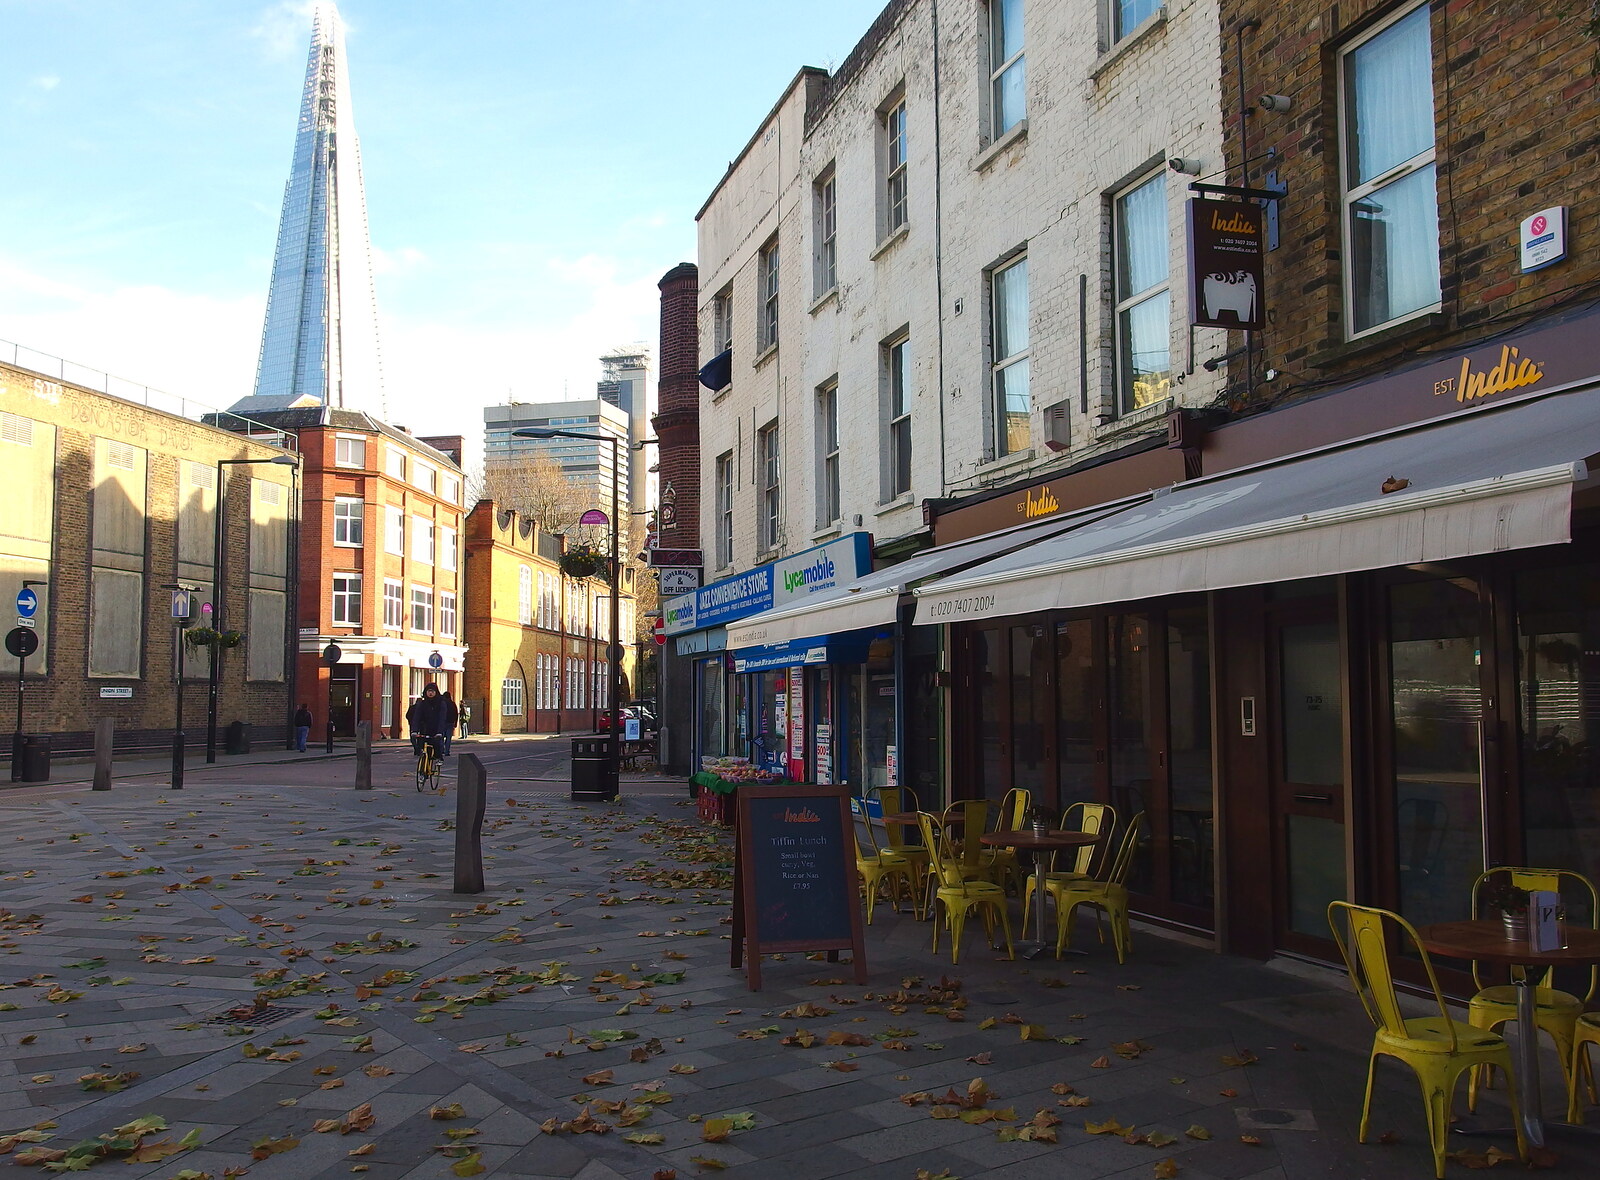 SwiftKey's Arcade Cabinet, and the Streets of Southwark, London - 5th December 2013: Union Street and the Shard